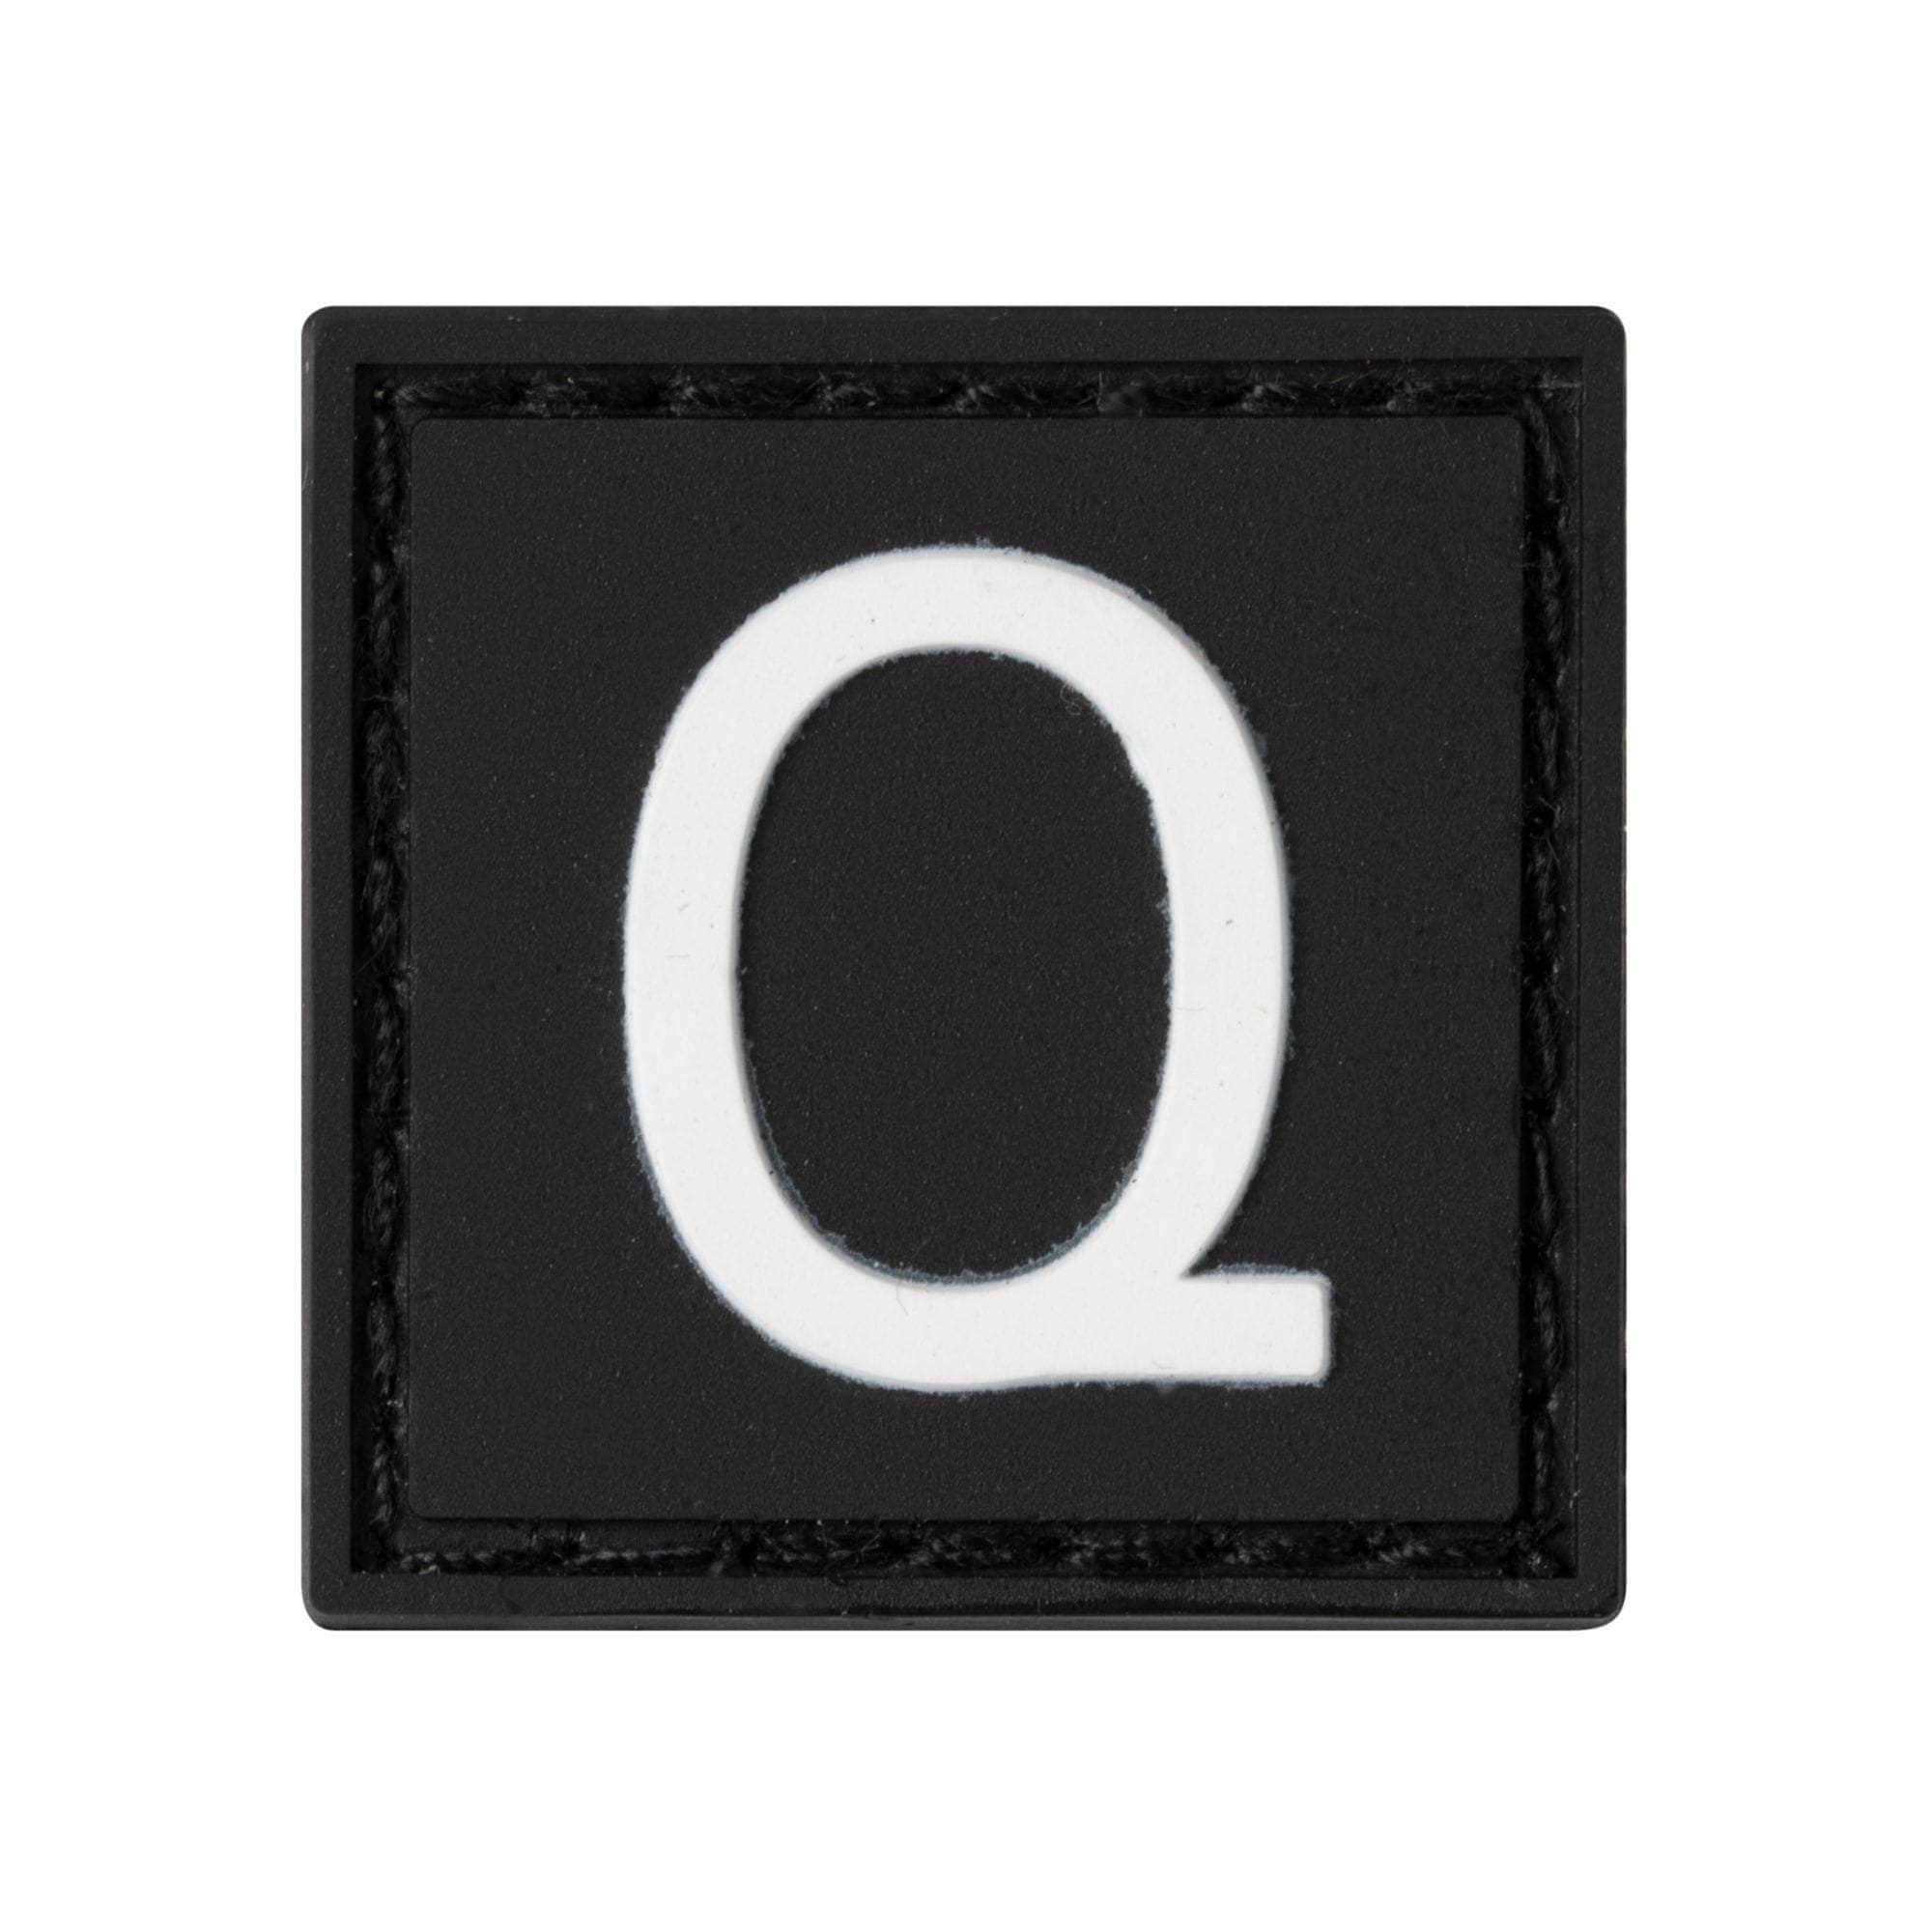 Built for Athletes Patches Q Letter Rubber Patches